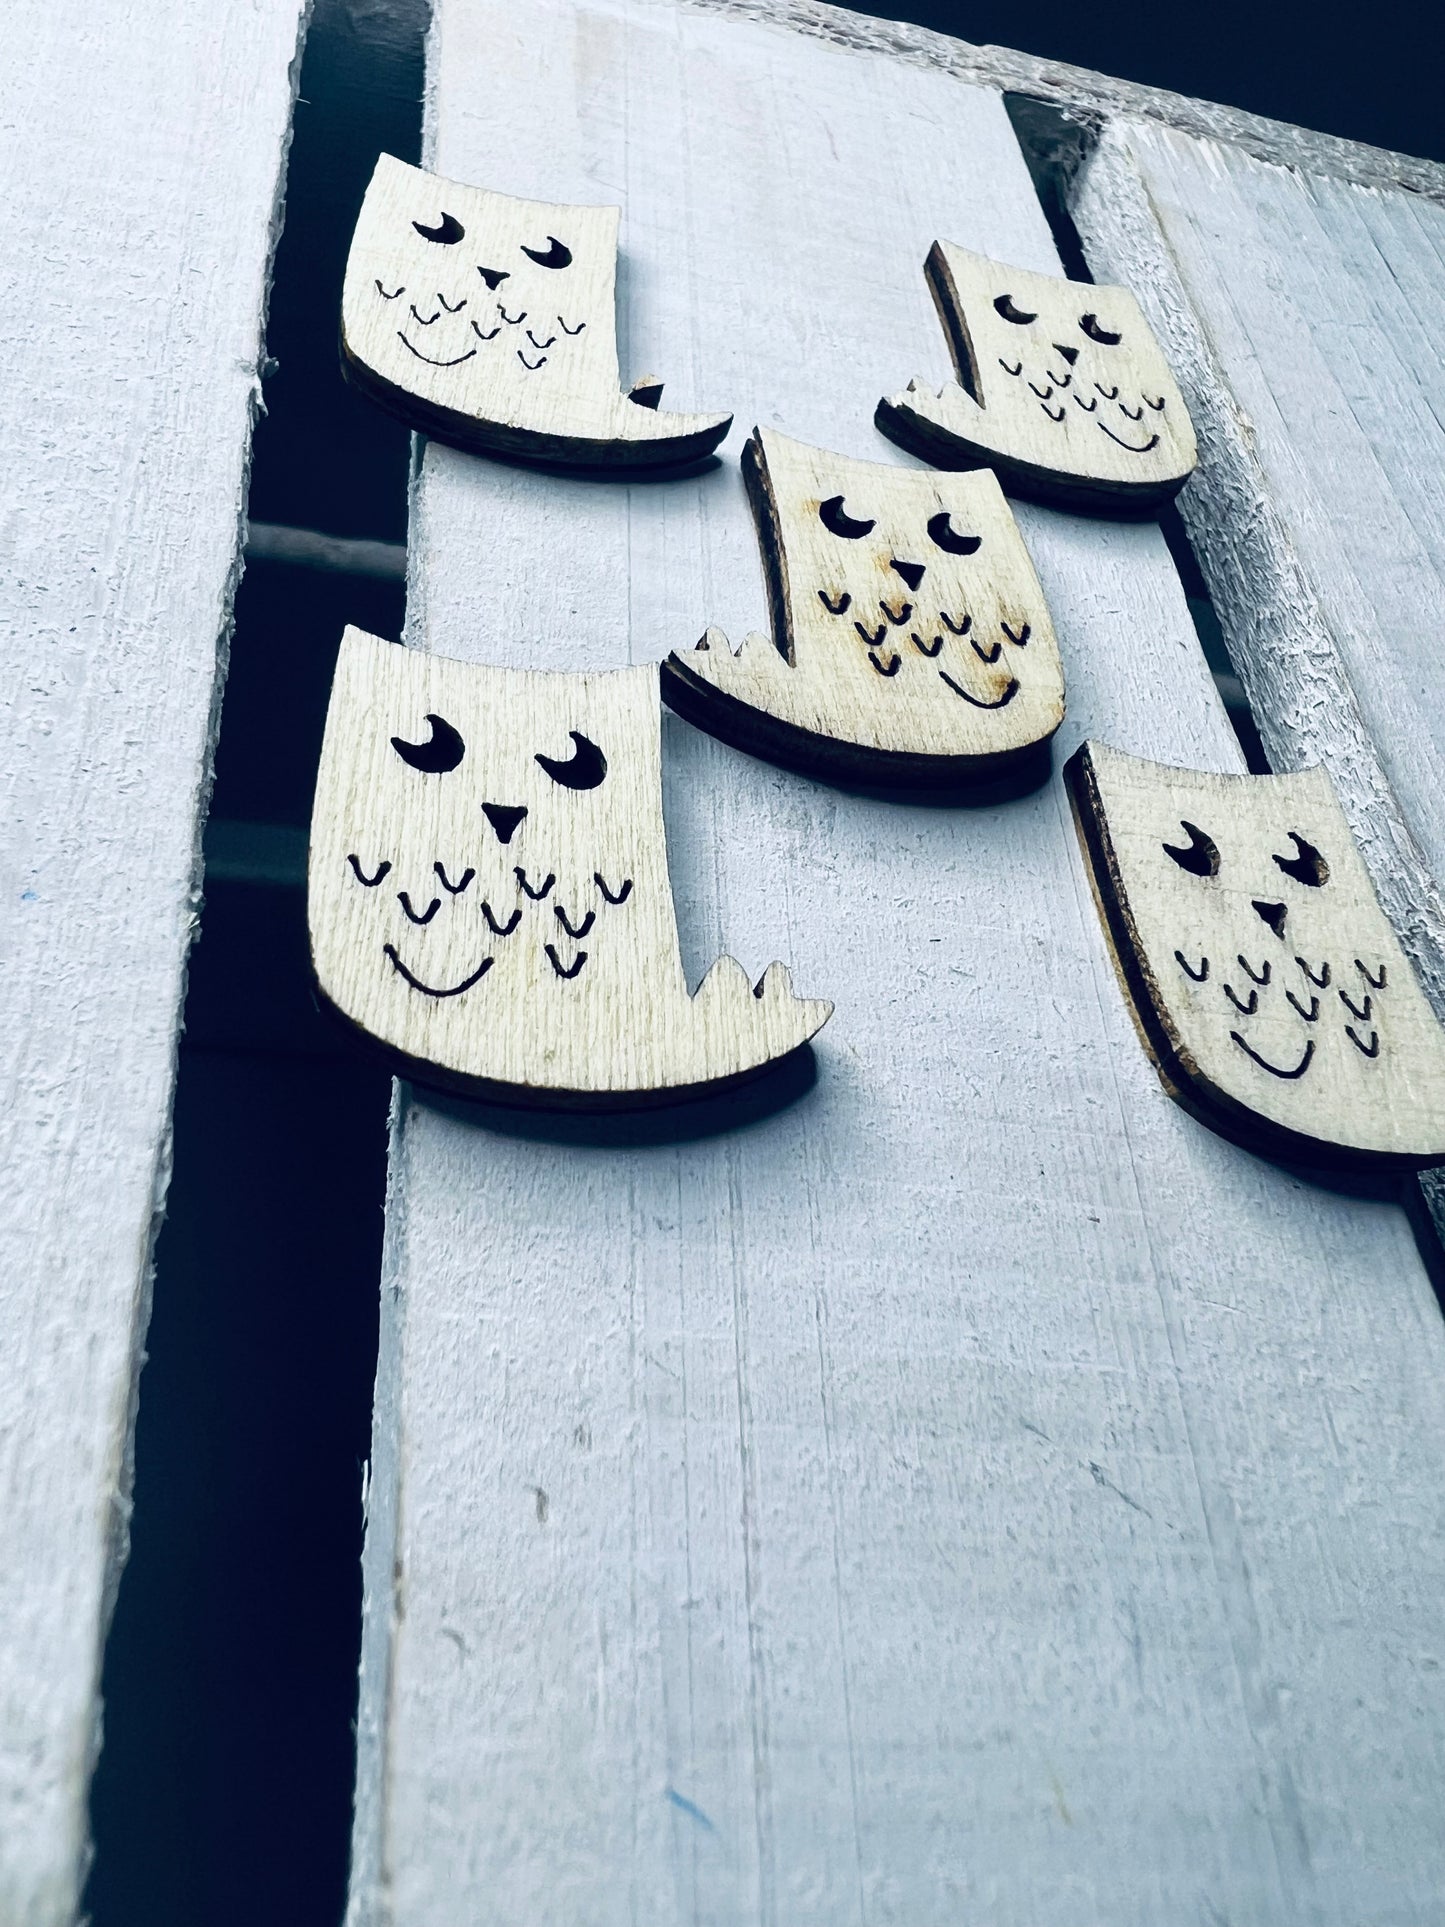 Miniature Wood Cut OWL Trinket Speech Therapy Mini Objects Woodland Cut Objects Mini Objects Speech Therapy Doodads